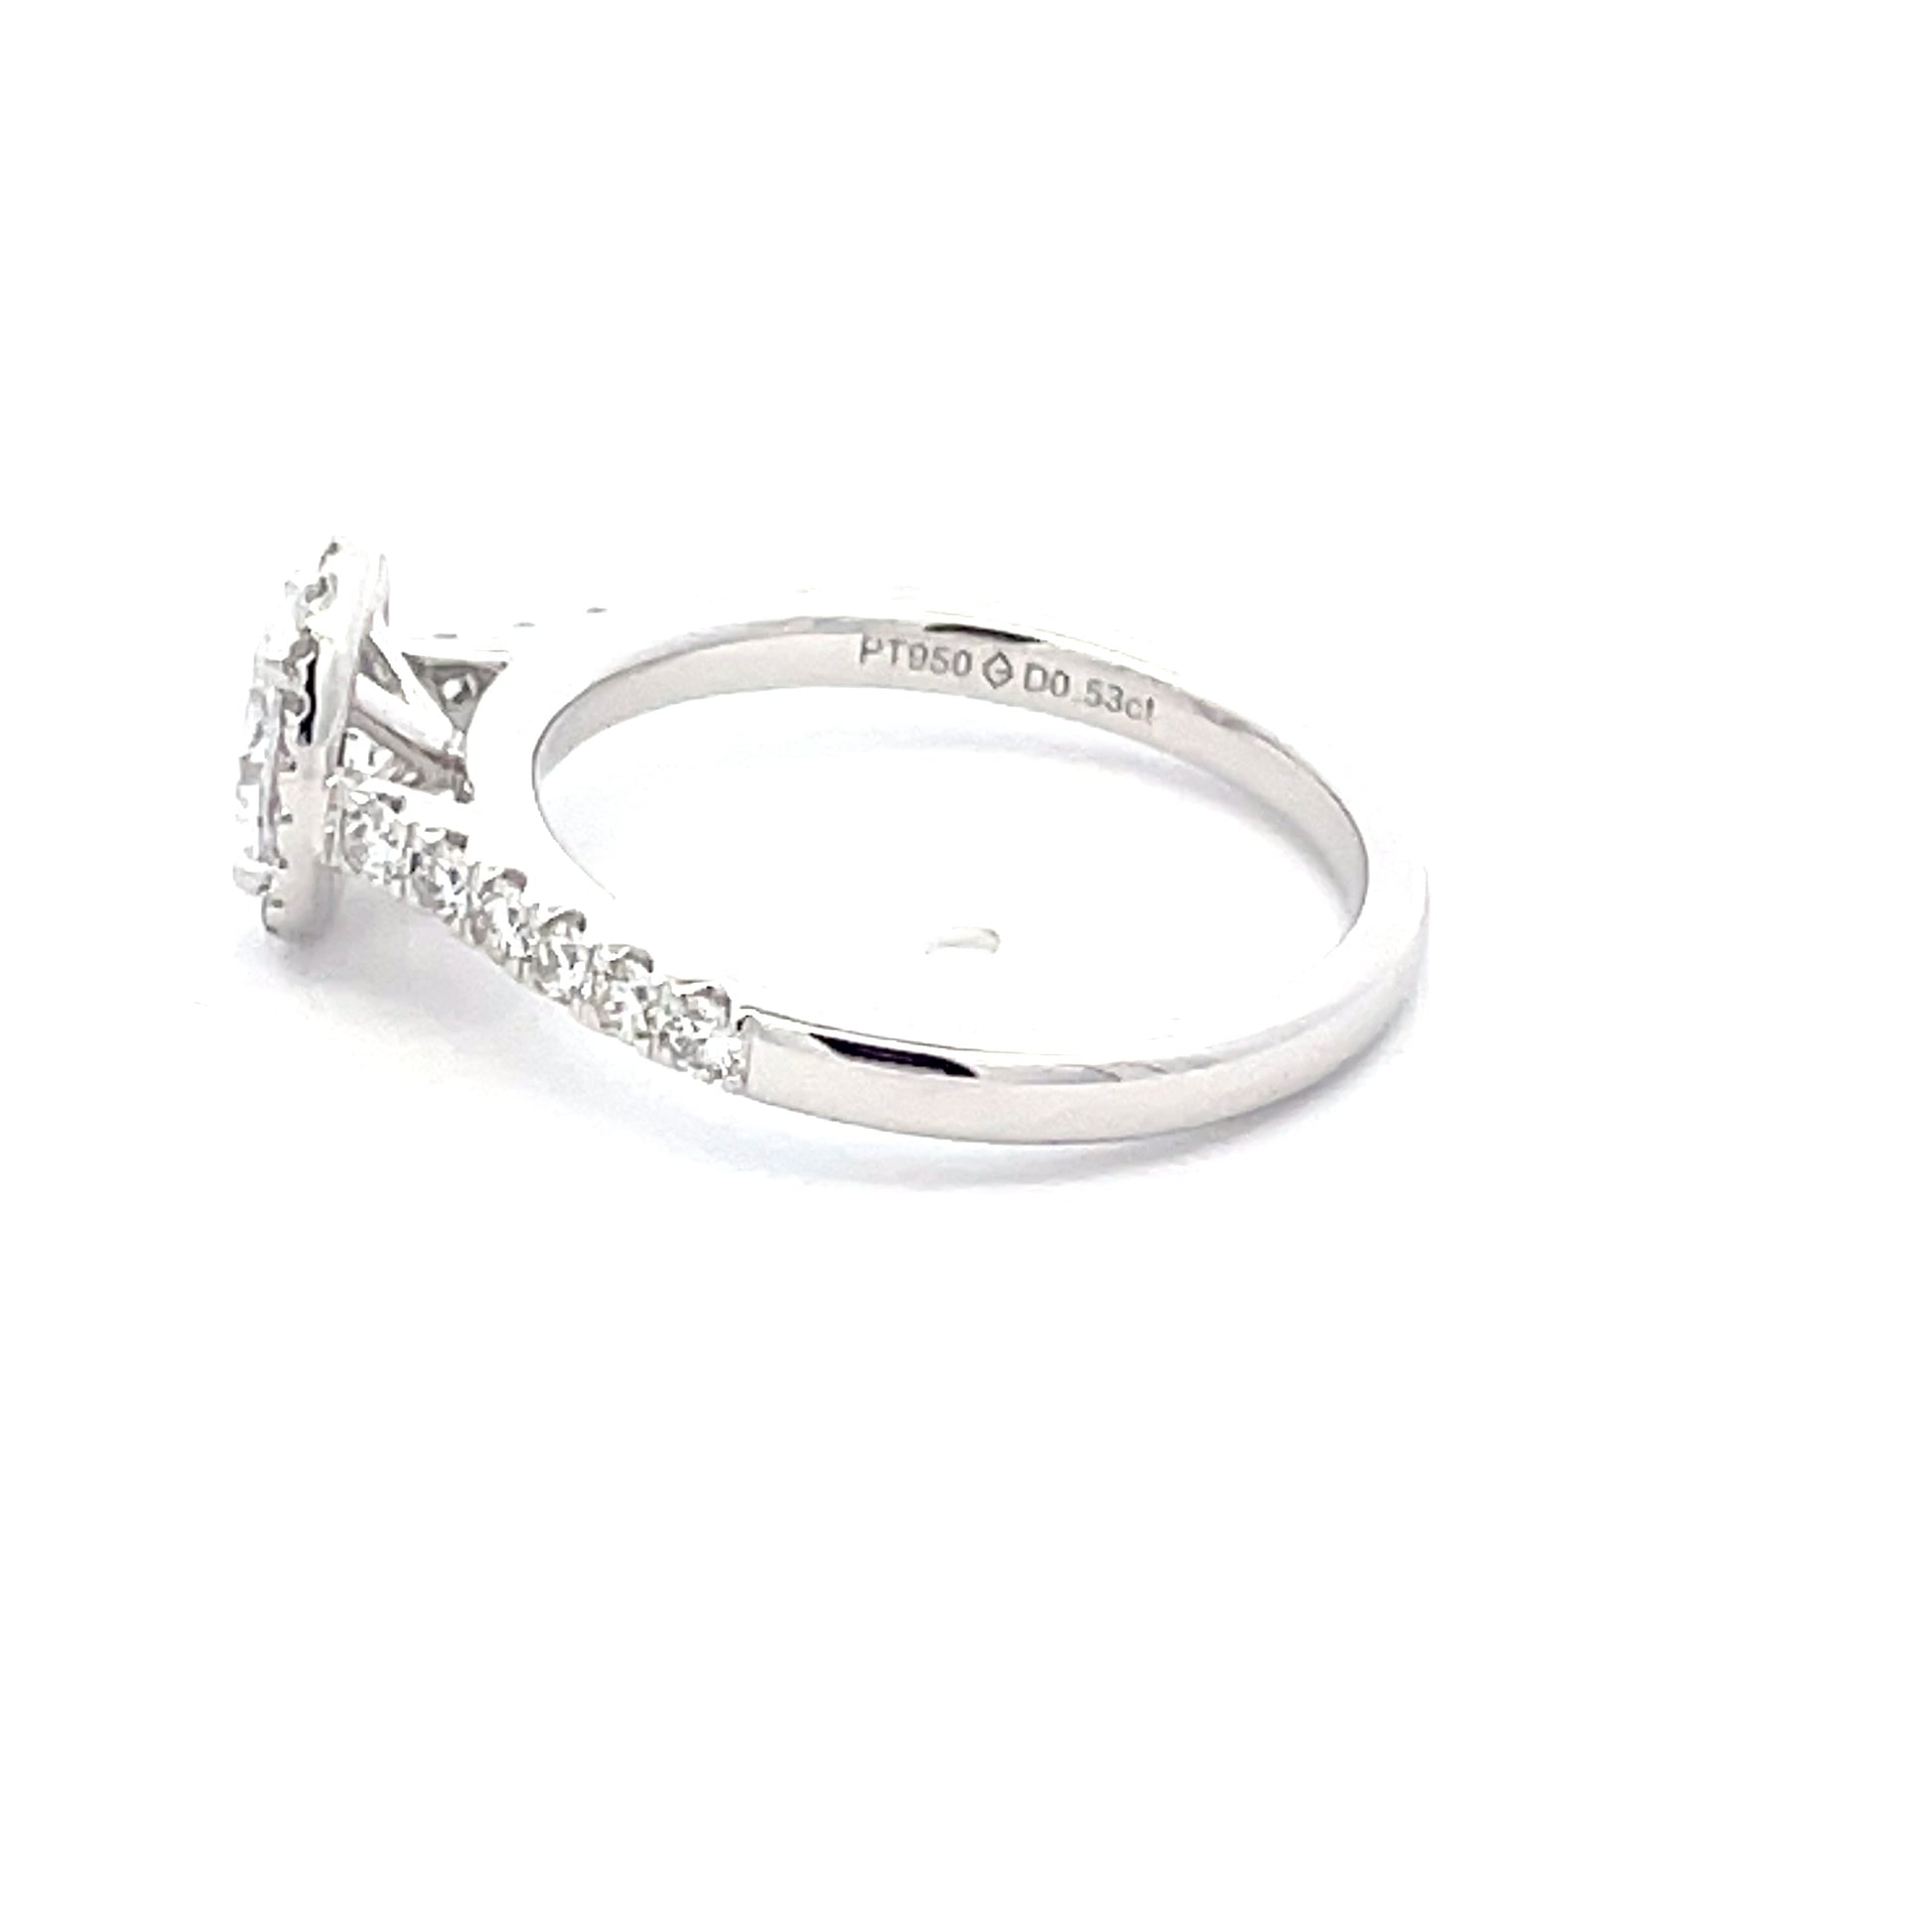 Aurora Cut Oval Shaped Diamond Halo Style Ring - 0.86cts  Gardiner Brothers   